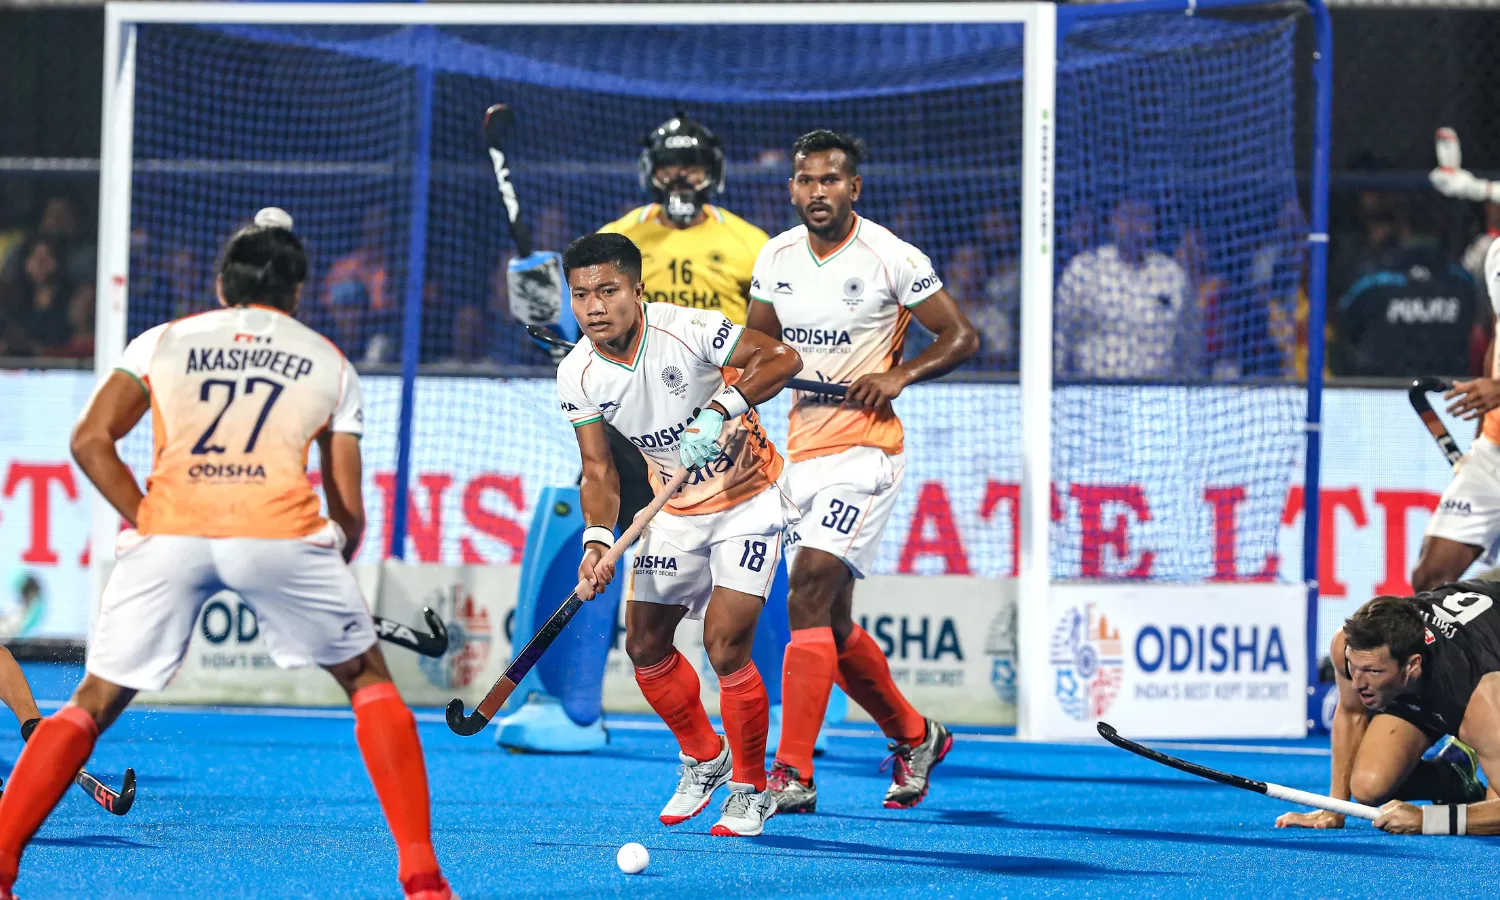 India goes down 1-5 against Australia in first game of Hockey Test series